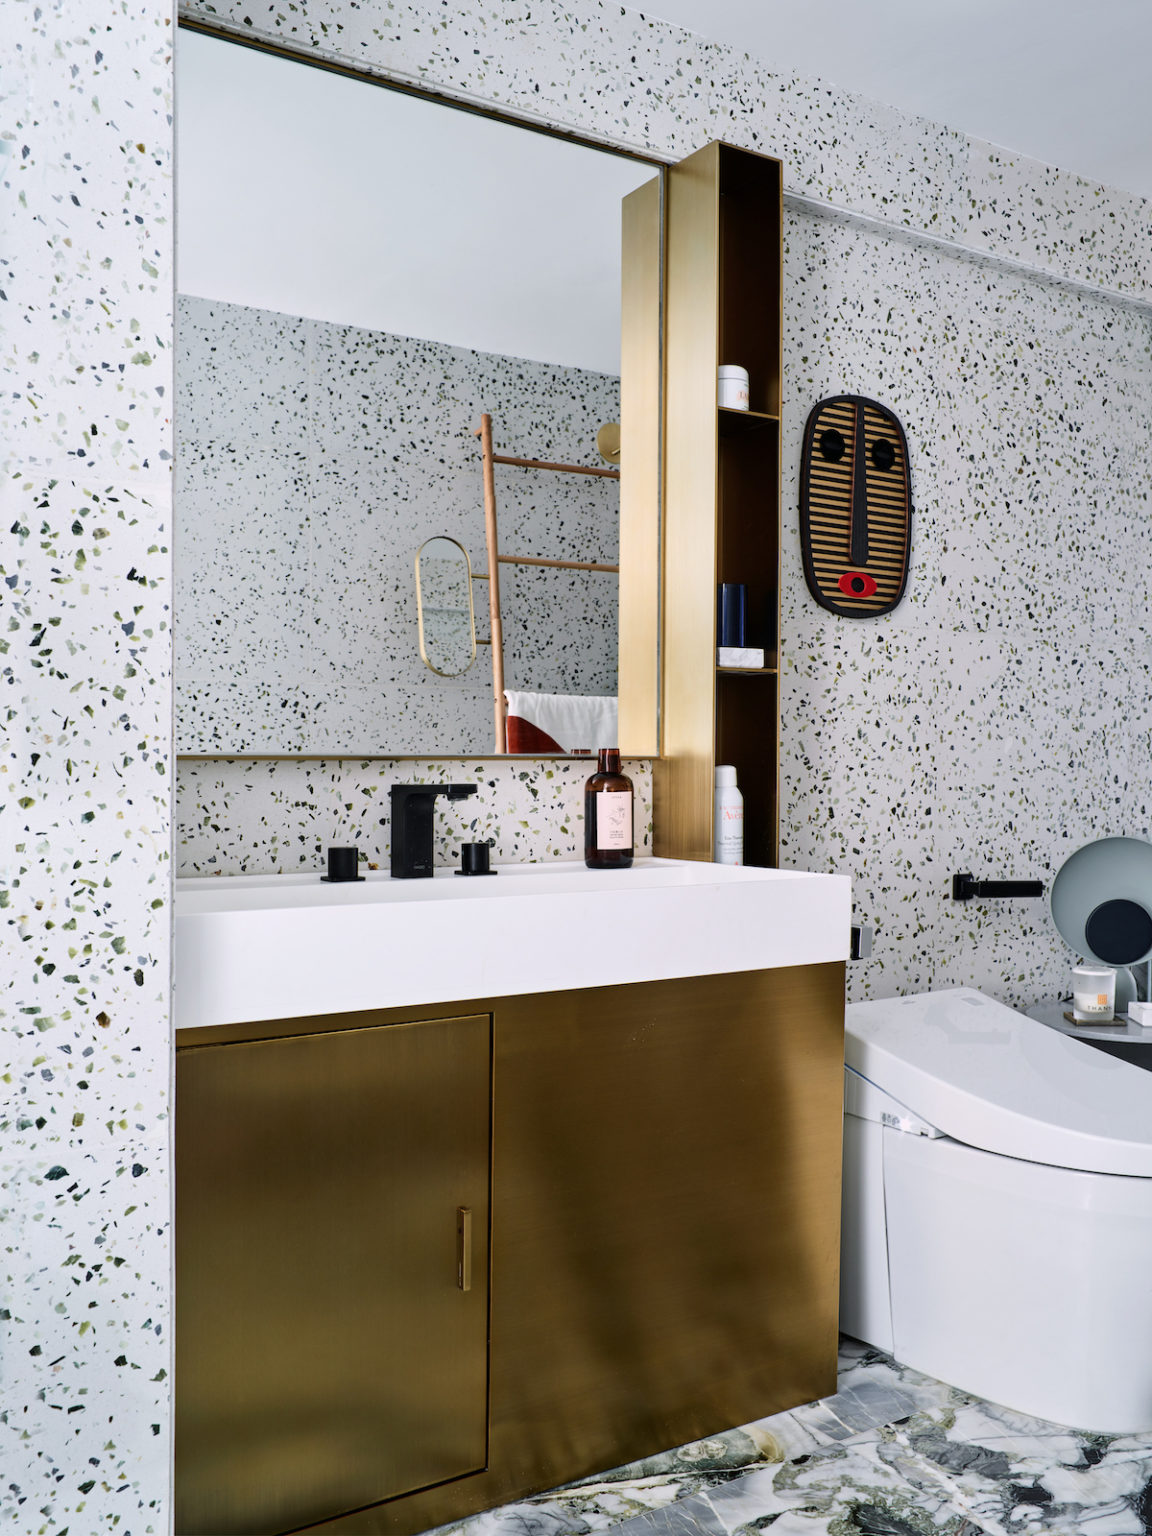 The gold vanity and a small shelf add to the look of the bathroom